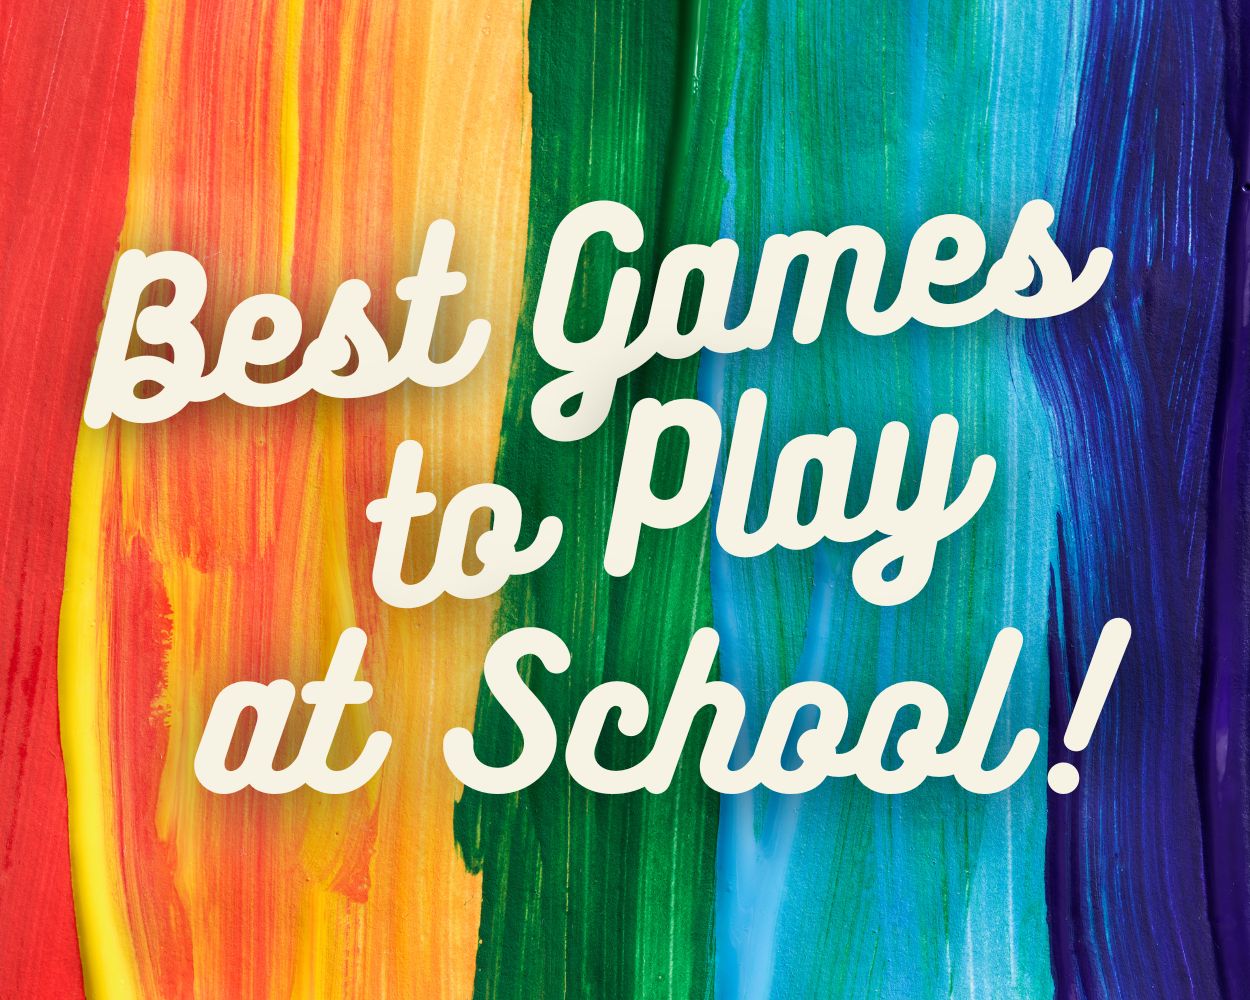 what are the best games to play at school